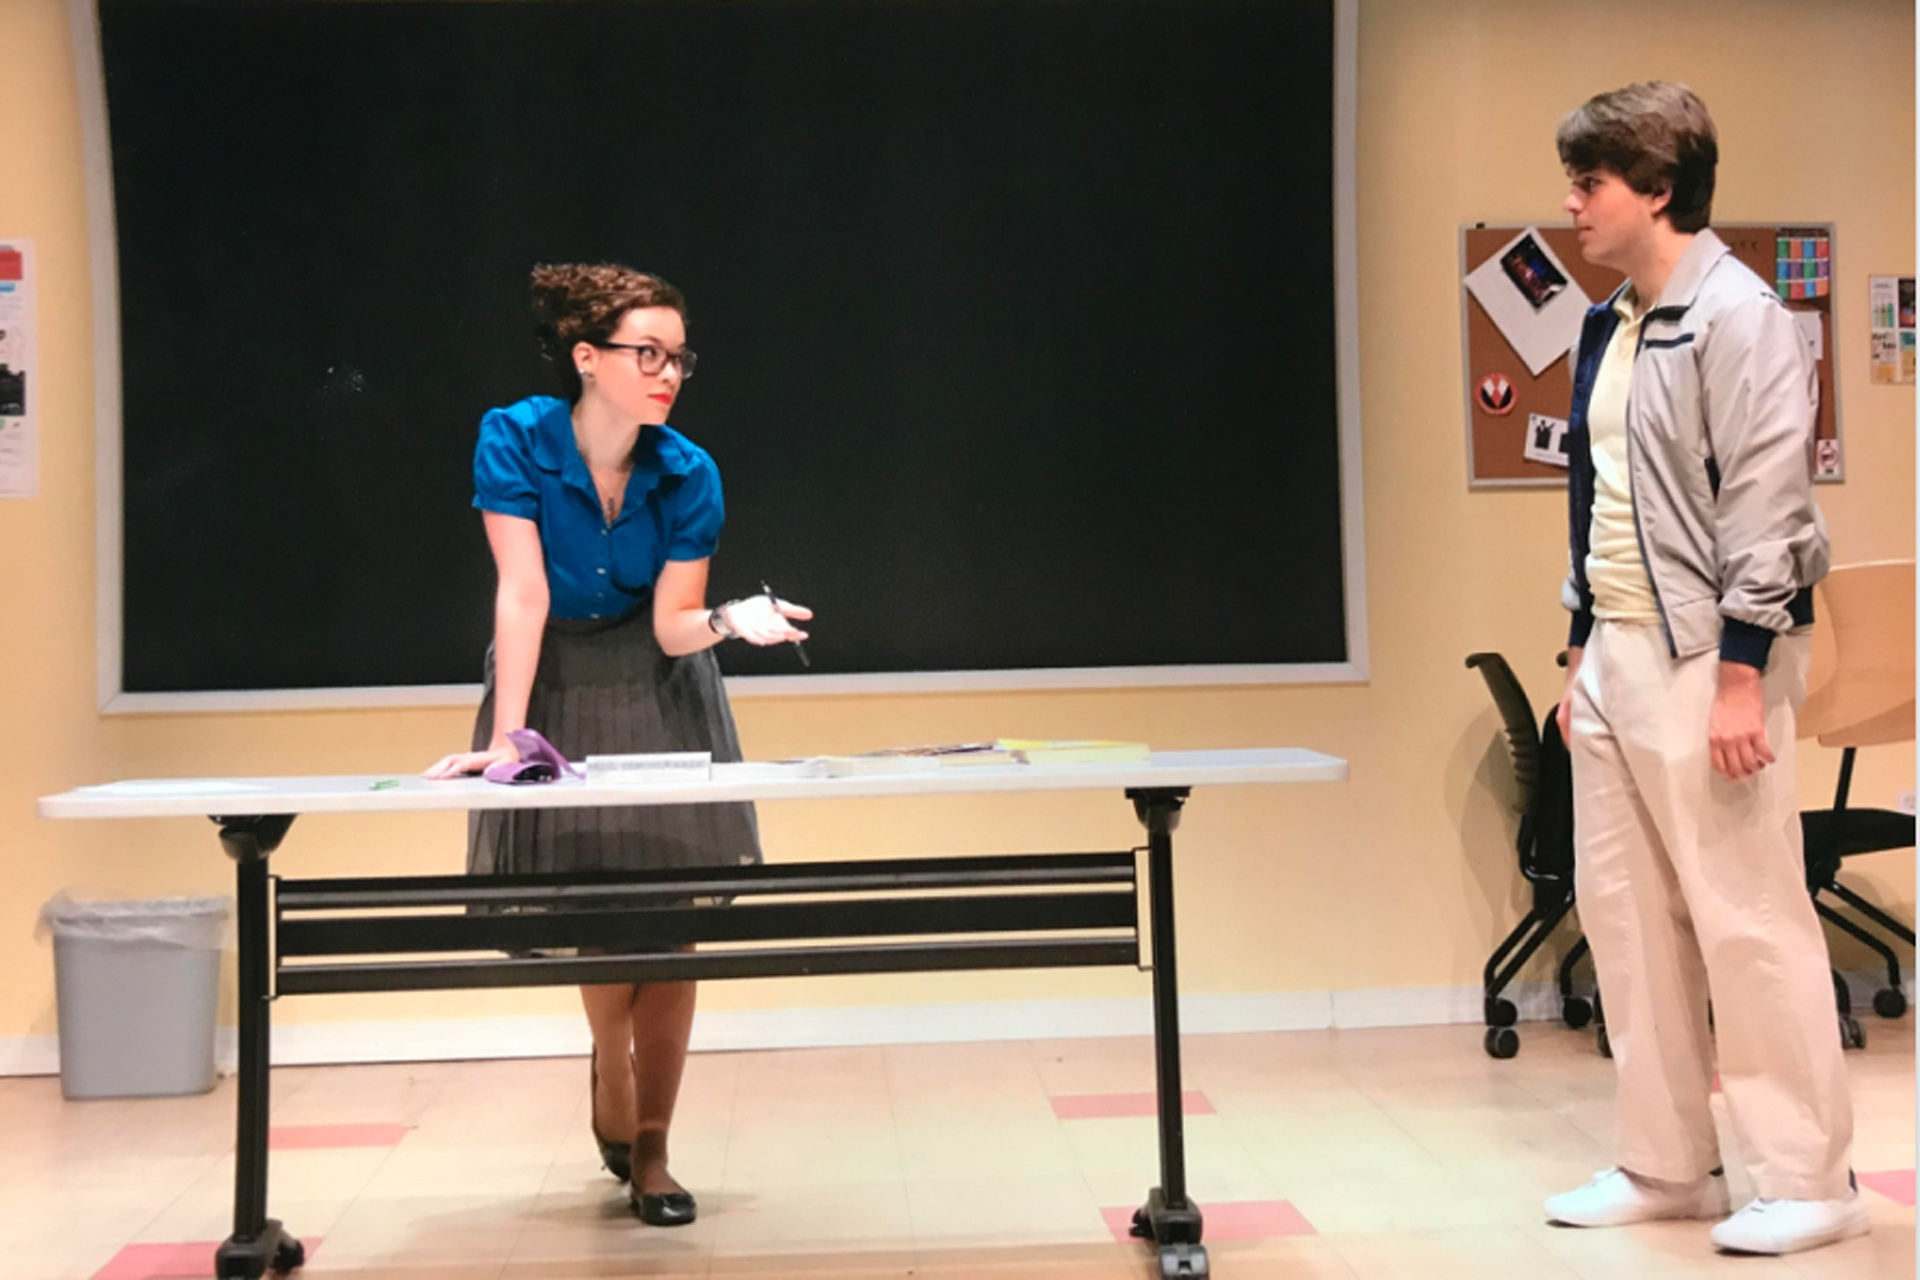 Actress dressed as a school teacher leaning on desk and speaking to another actor